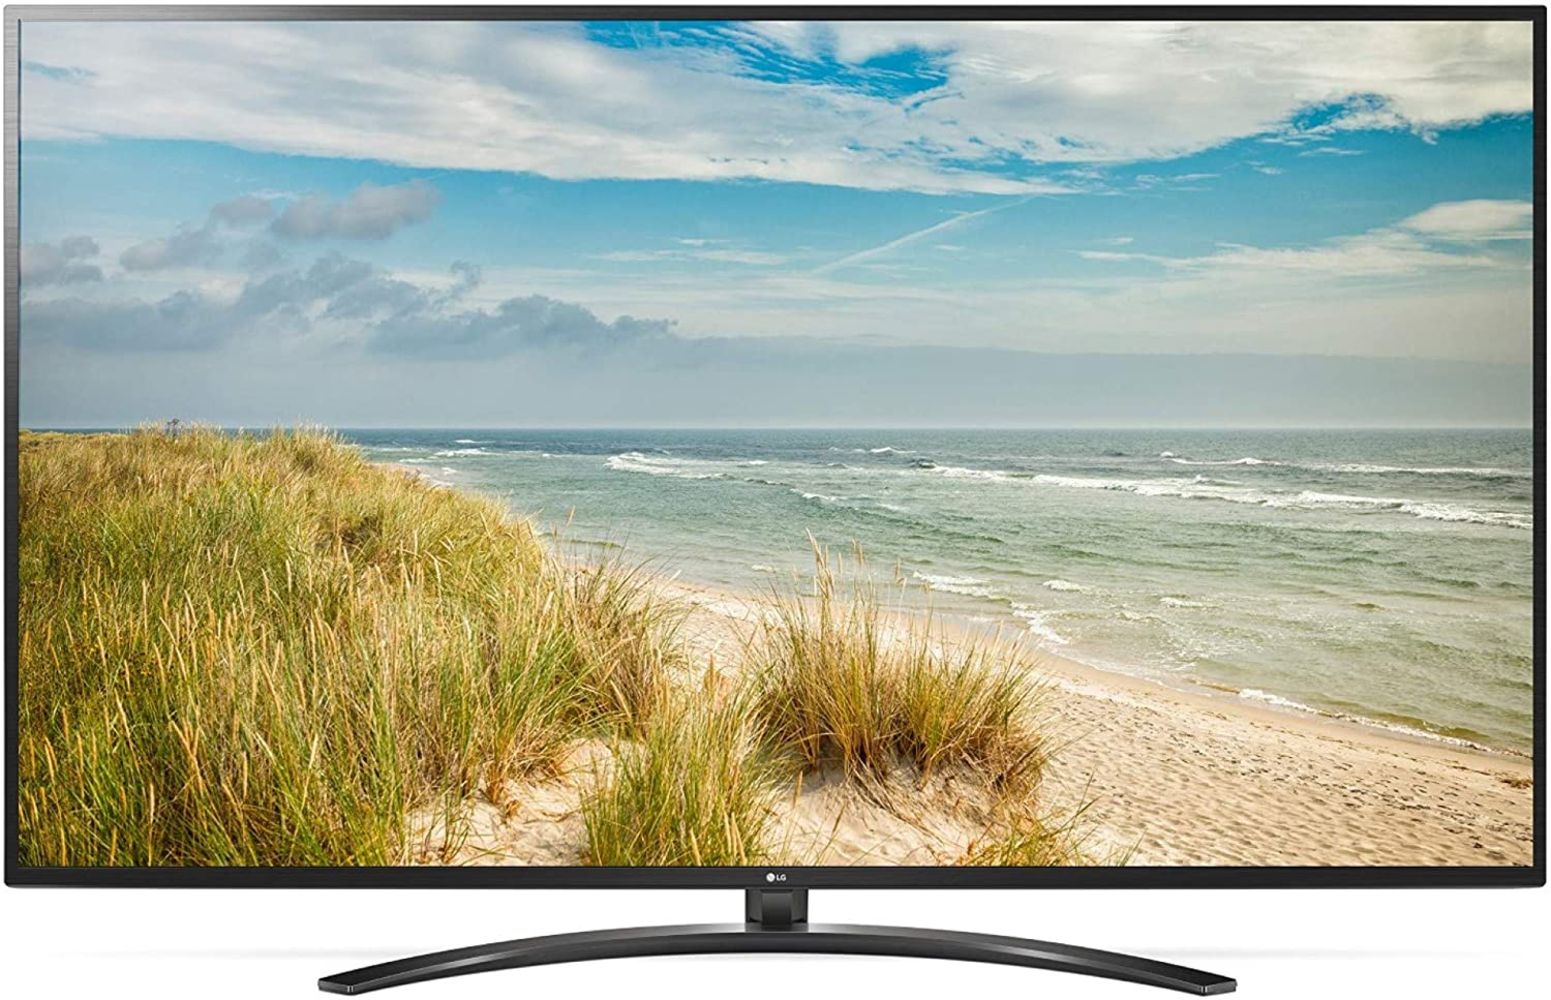 Technology Stock Inc LG OLED TV's, HP Laptops, Refurbed and Graded Lots From Distributors and Manufacturers